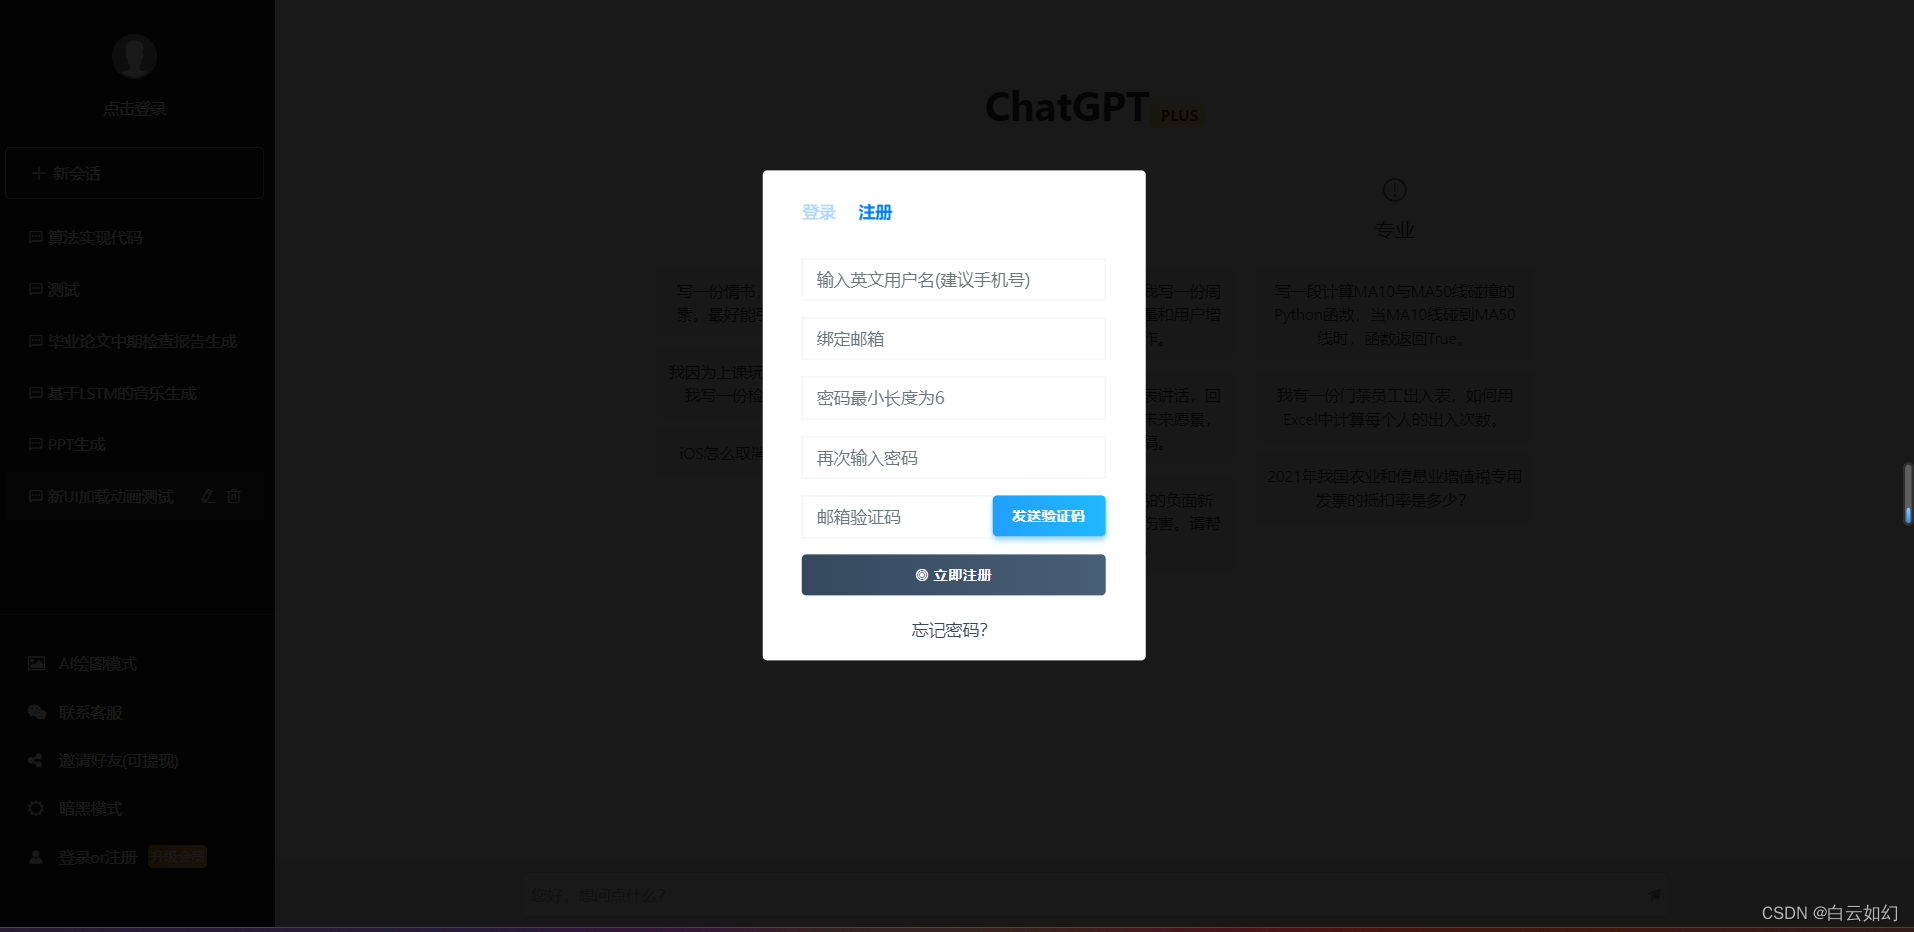 The latest ChatGPT website source code operating version